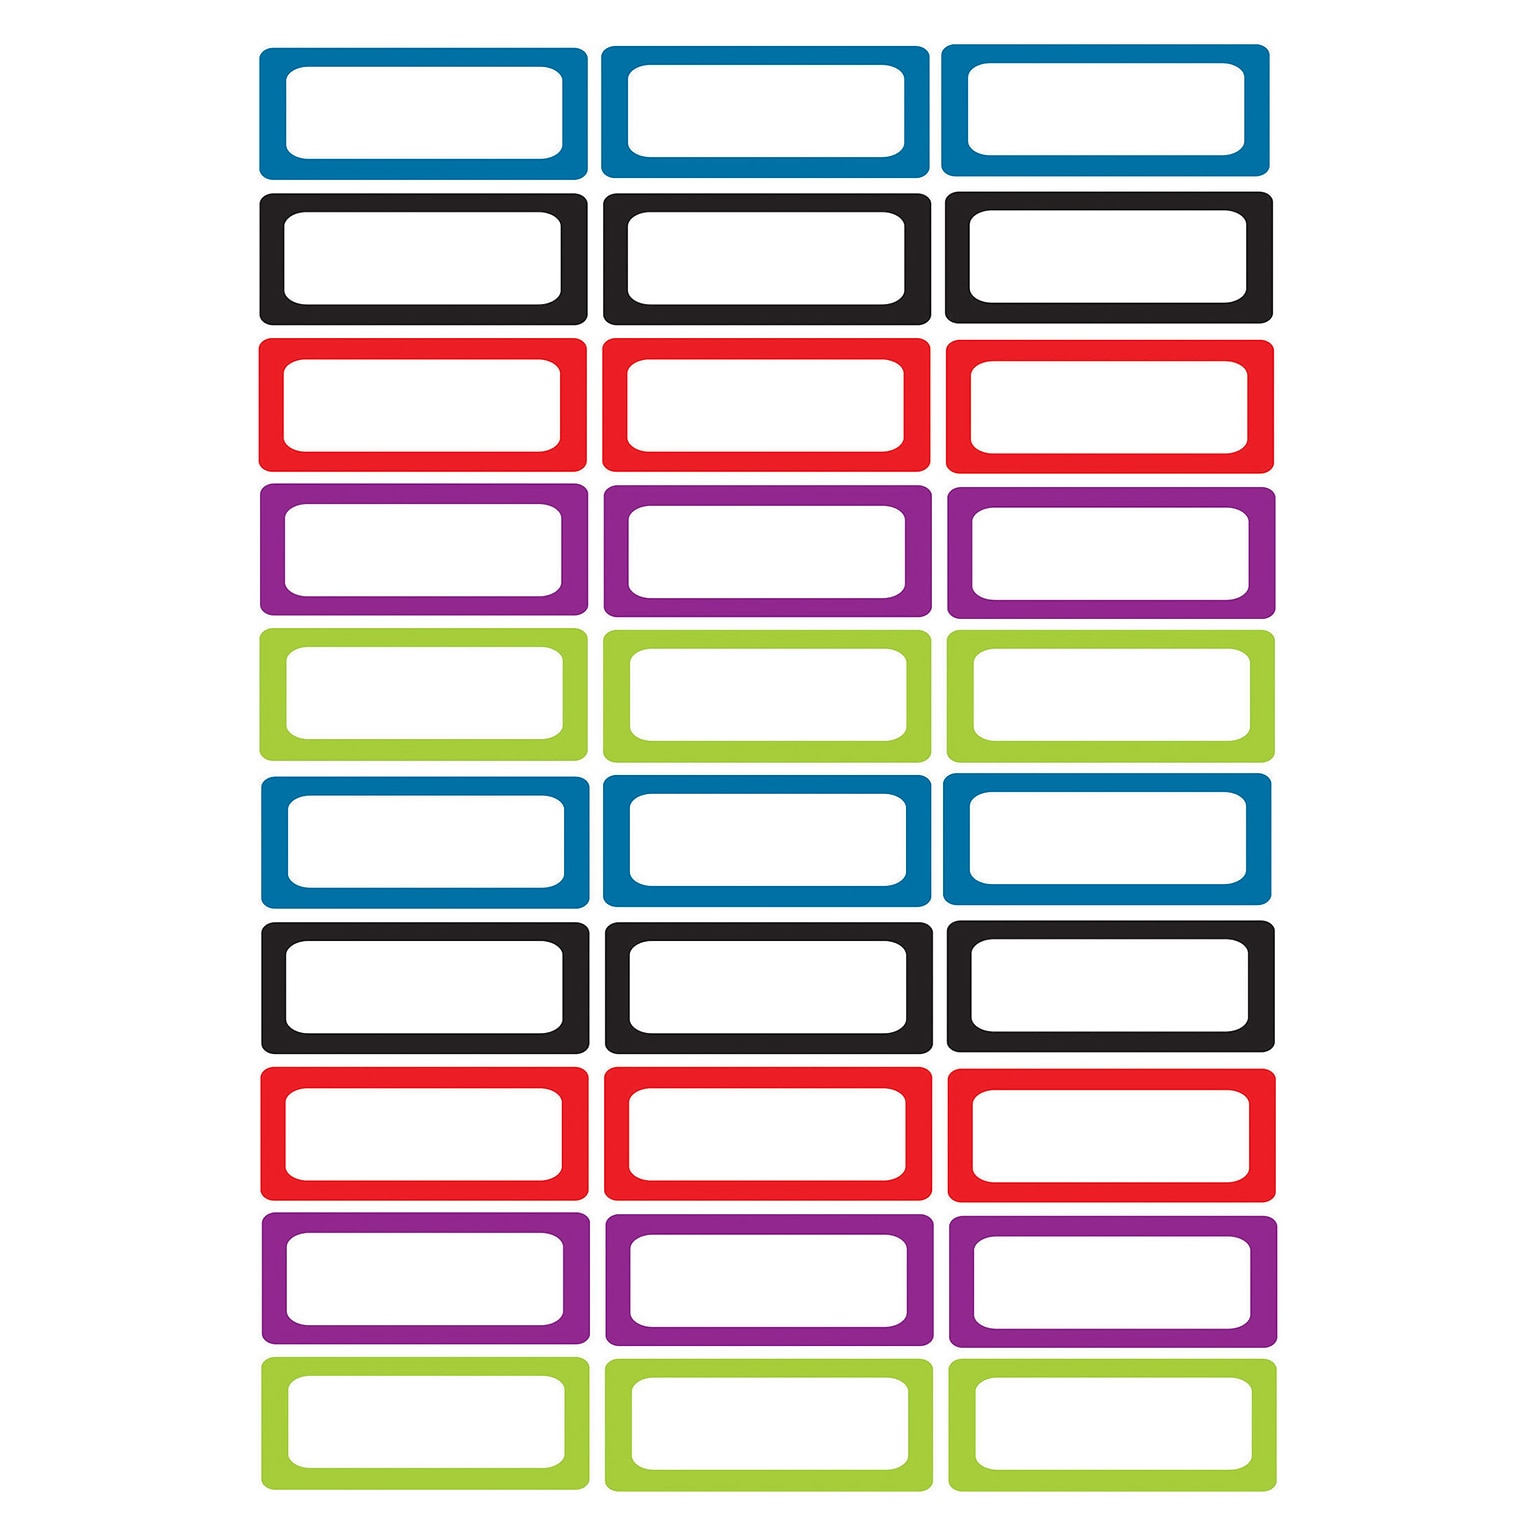 Ashley Productions Die-Cut Magnet Foam Labels/Nameplates Multi-Themed Magnetic Cut Outs, 30/Pack